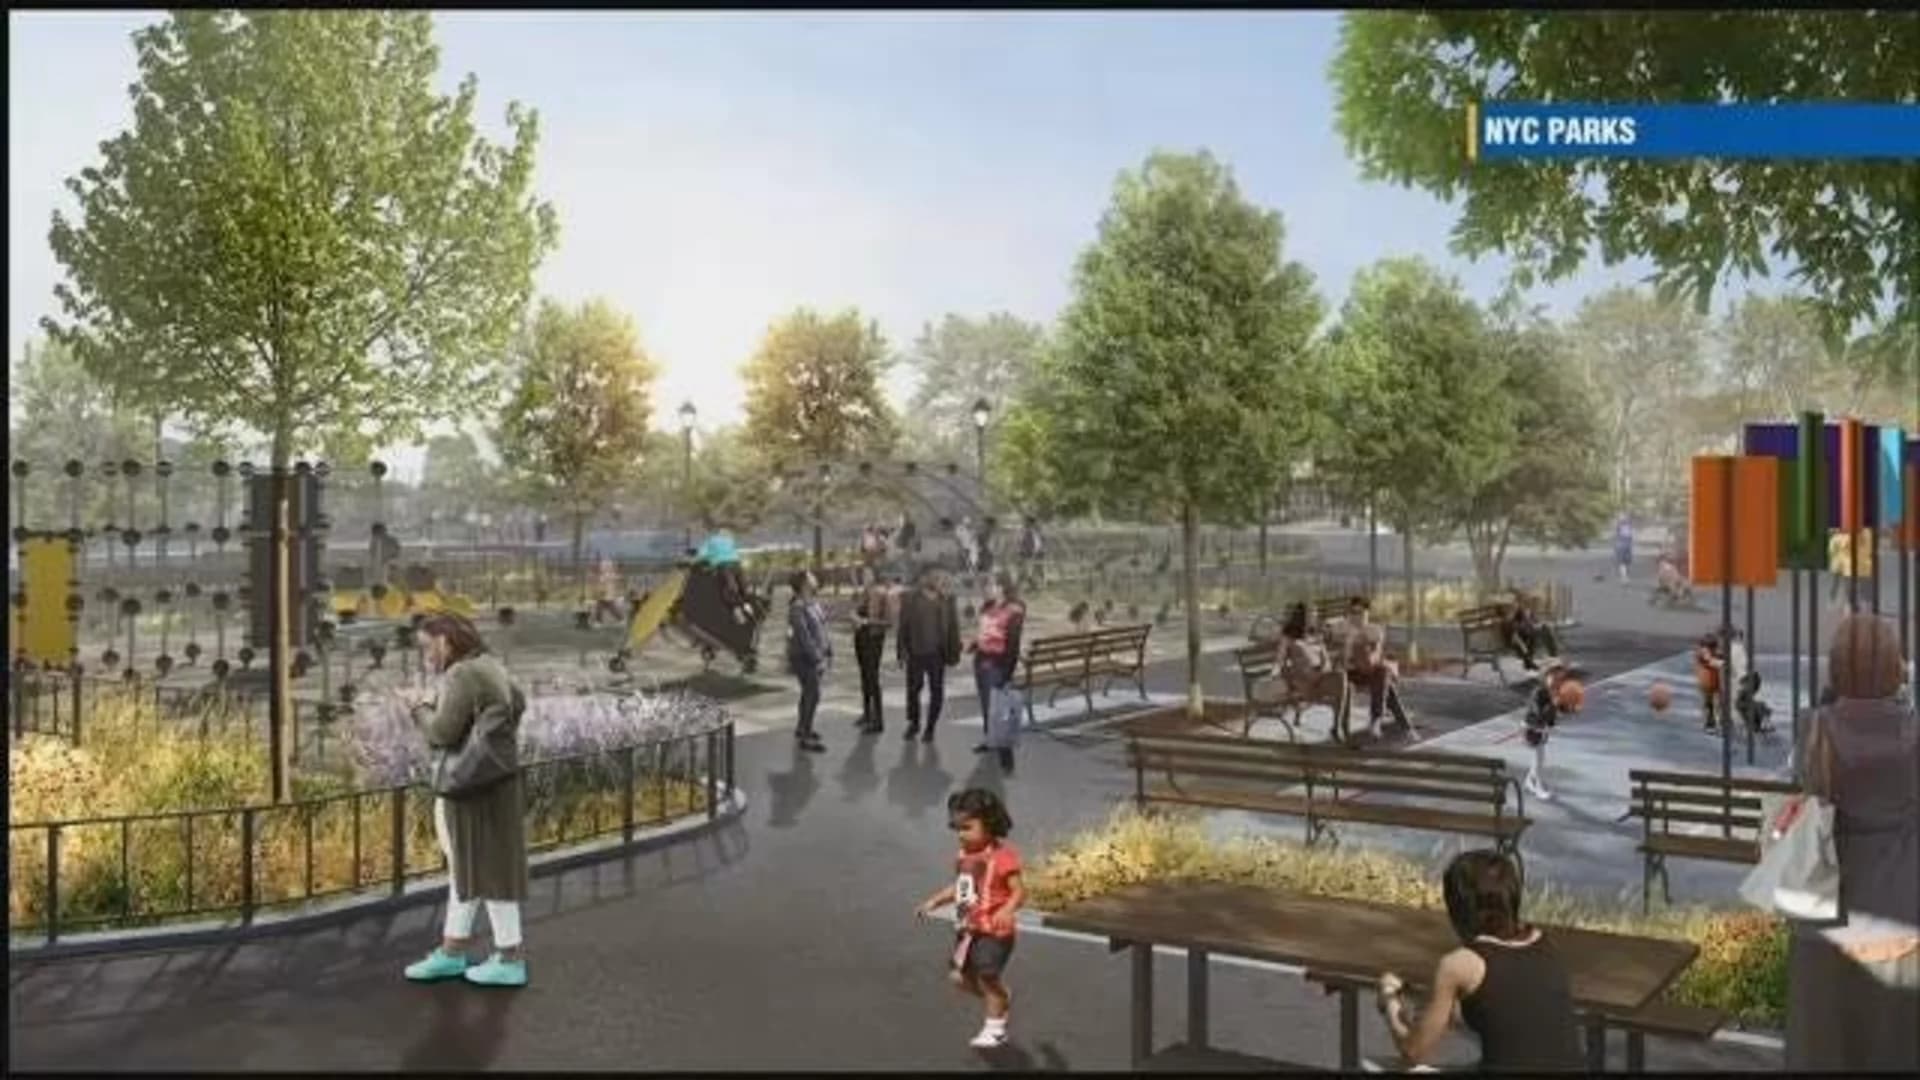 City breaks ground on $30M reconstruction of Betsy Head Park